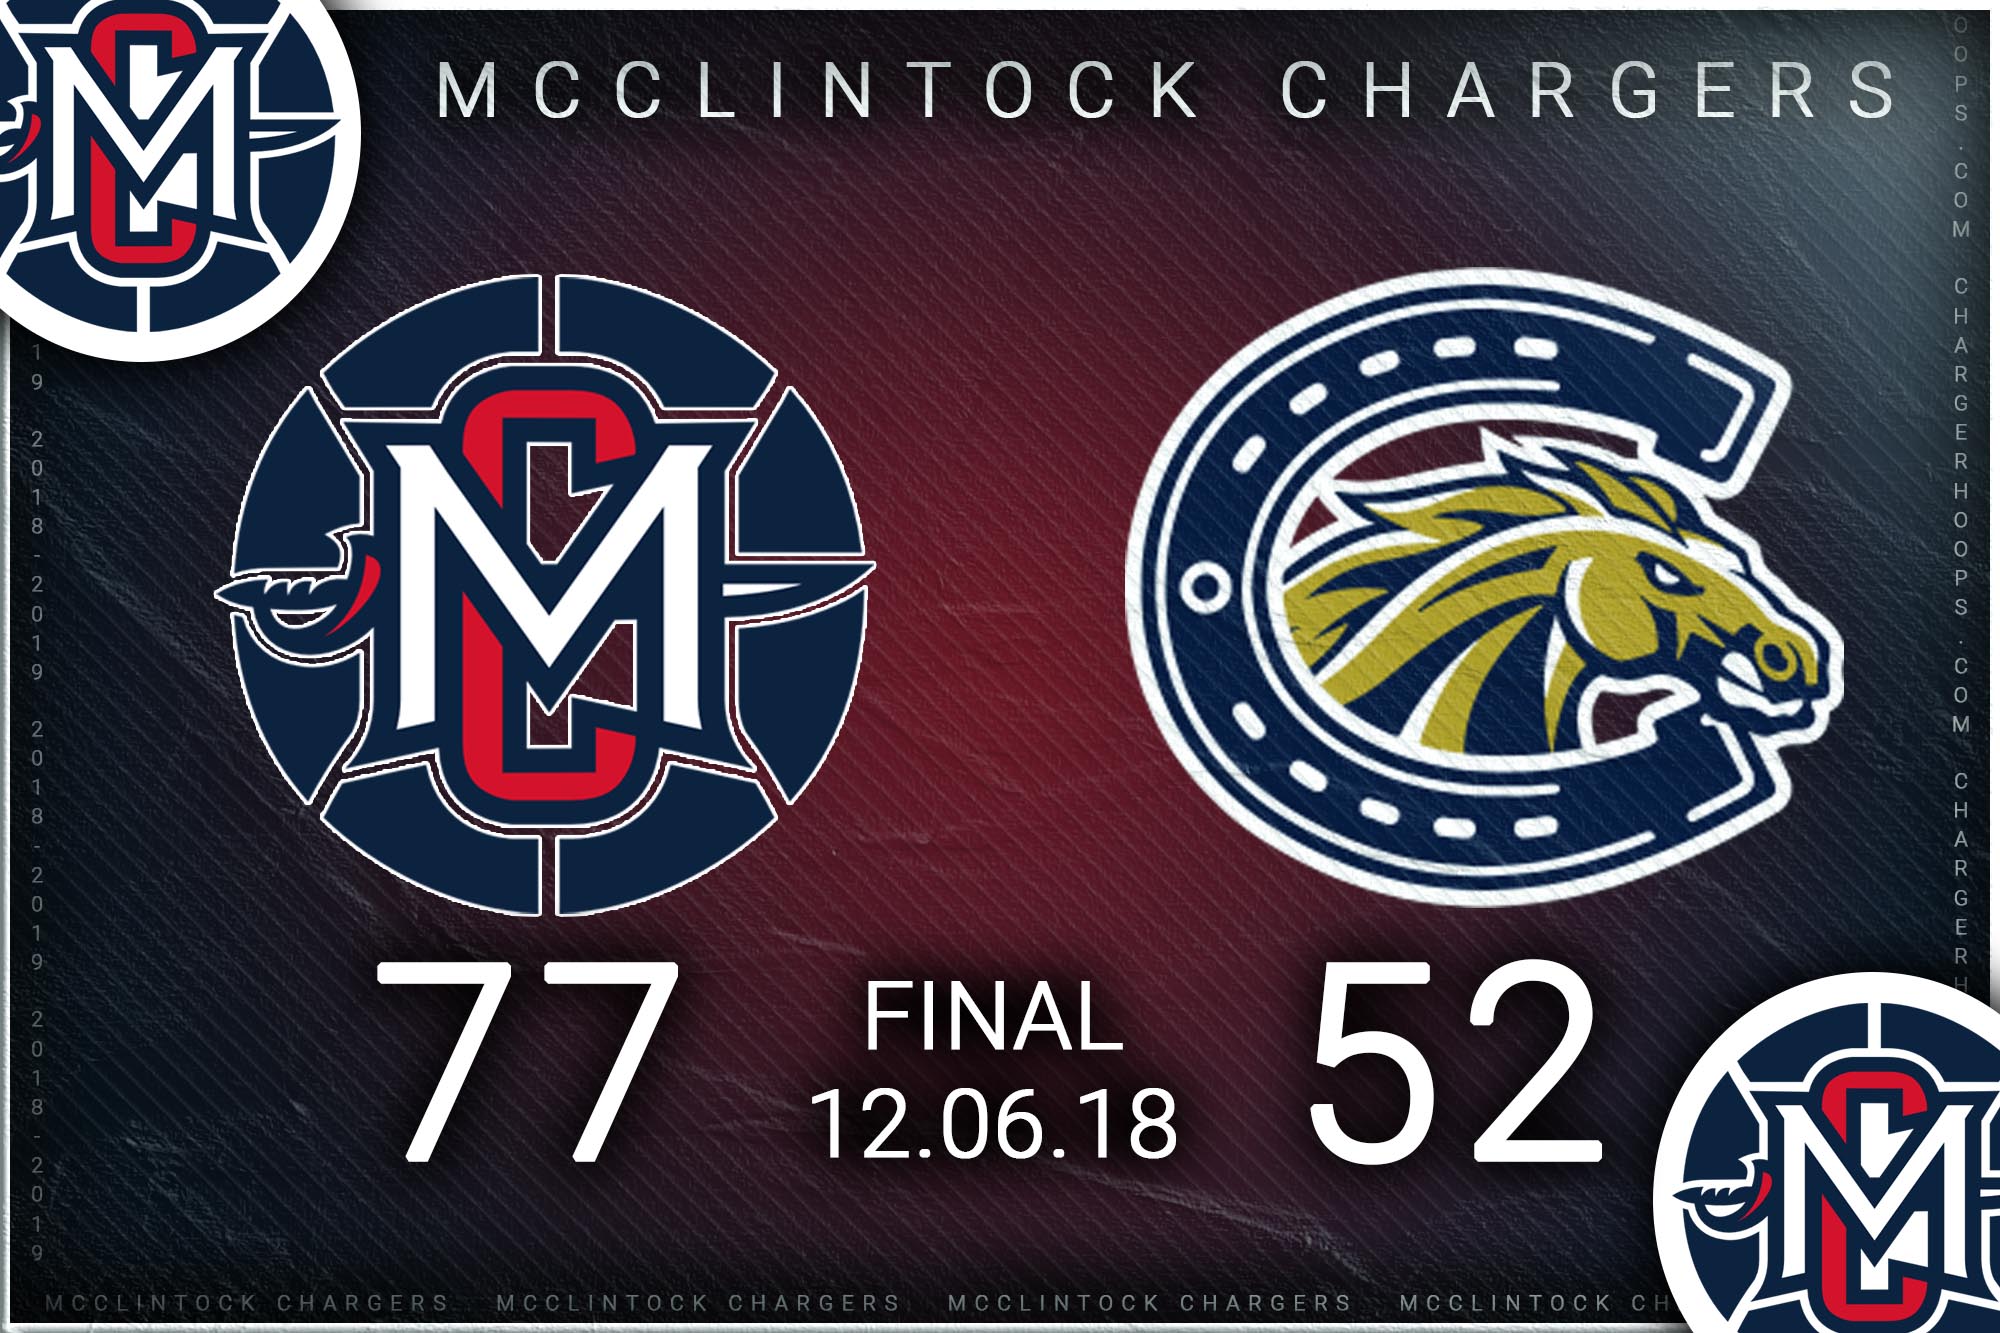 McClintock Chargers vs. Castell